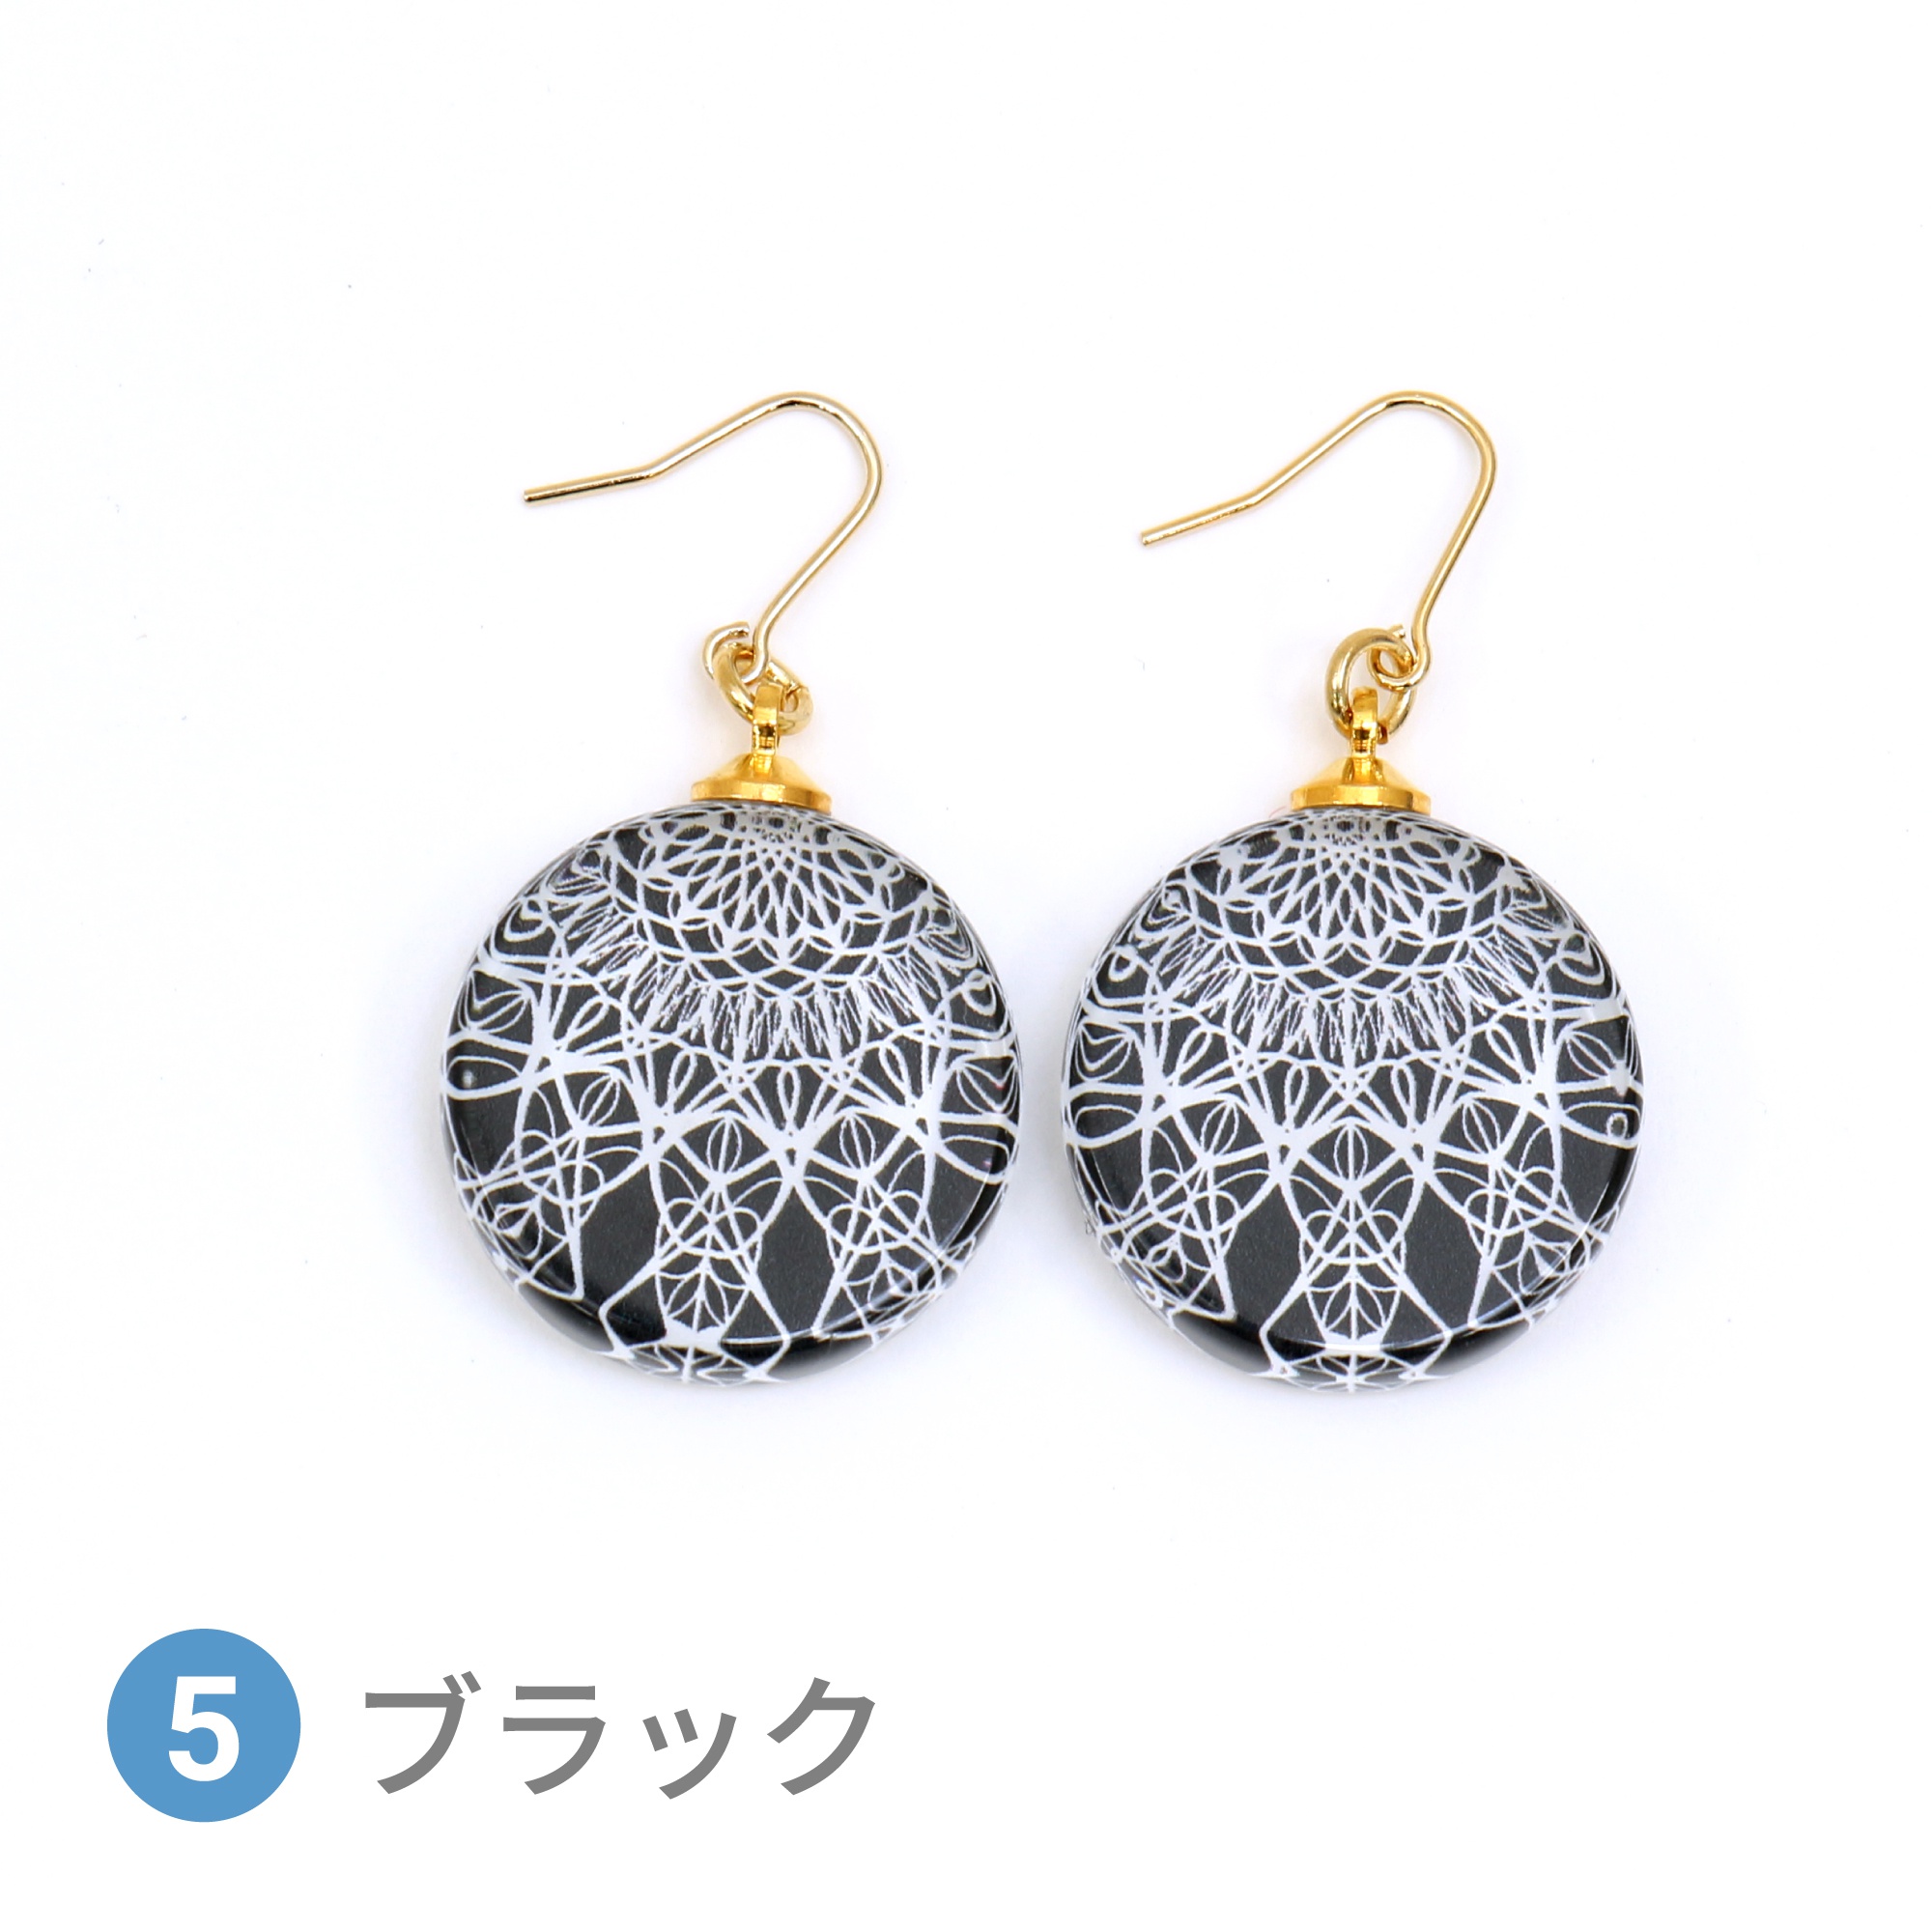 Glass accessories Pierced Earring LACE black round shape